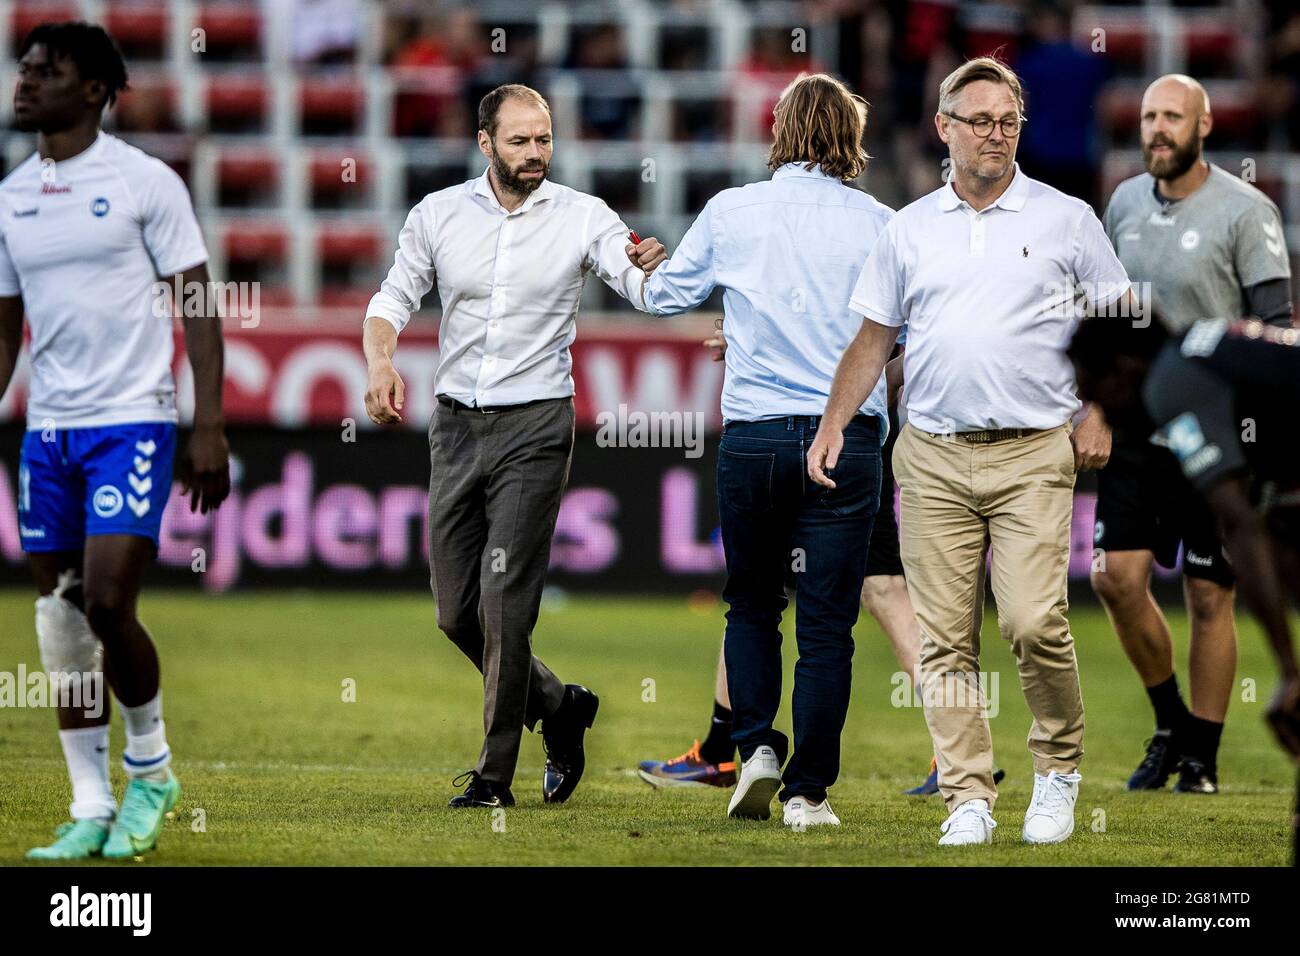 Herning, Denmark. 16th July, 2021. Head coach Andreas Alm (L) of Odense  Boldklub greets head coach Bo Henriksen of FC Mitjylland after the 3F  Superliga match between FC Midtjylland and Odense Boldklub